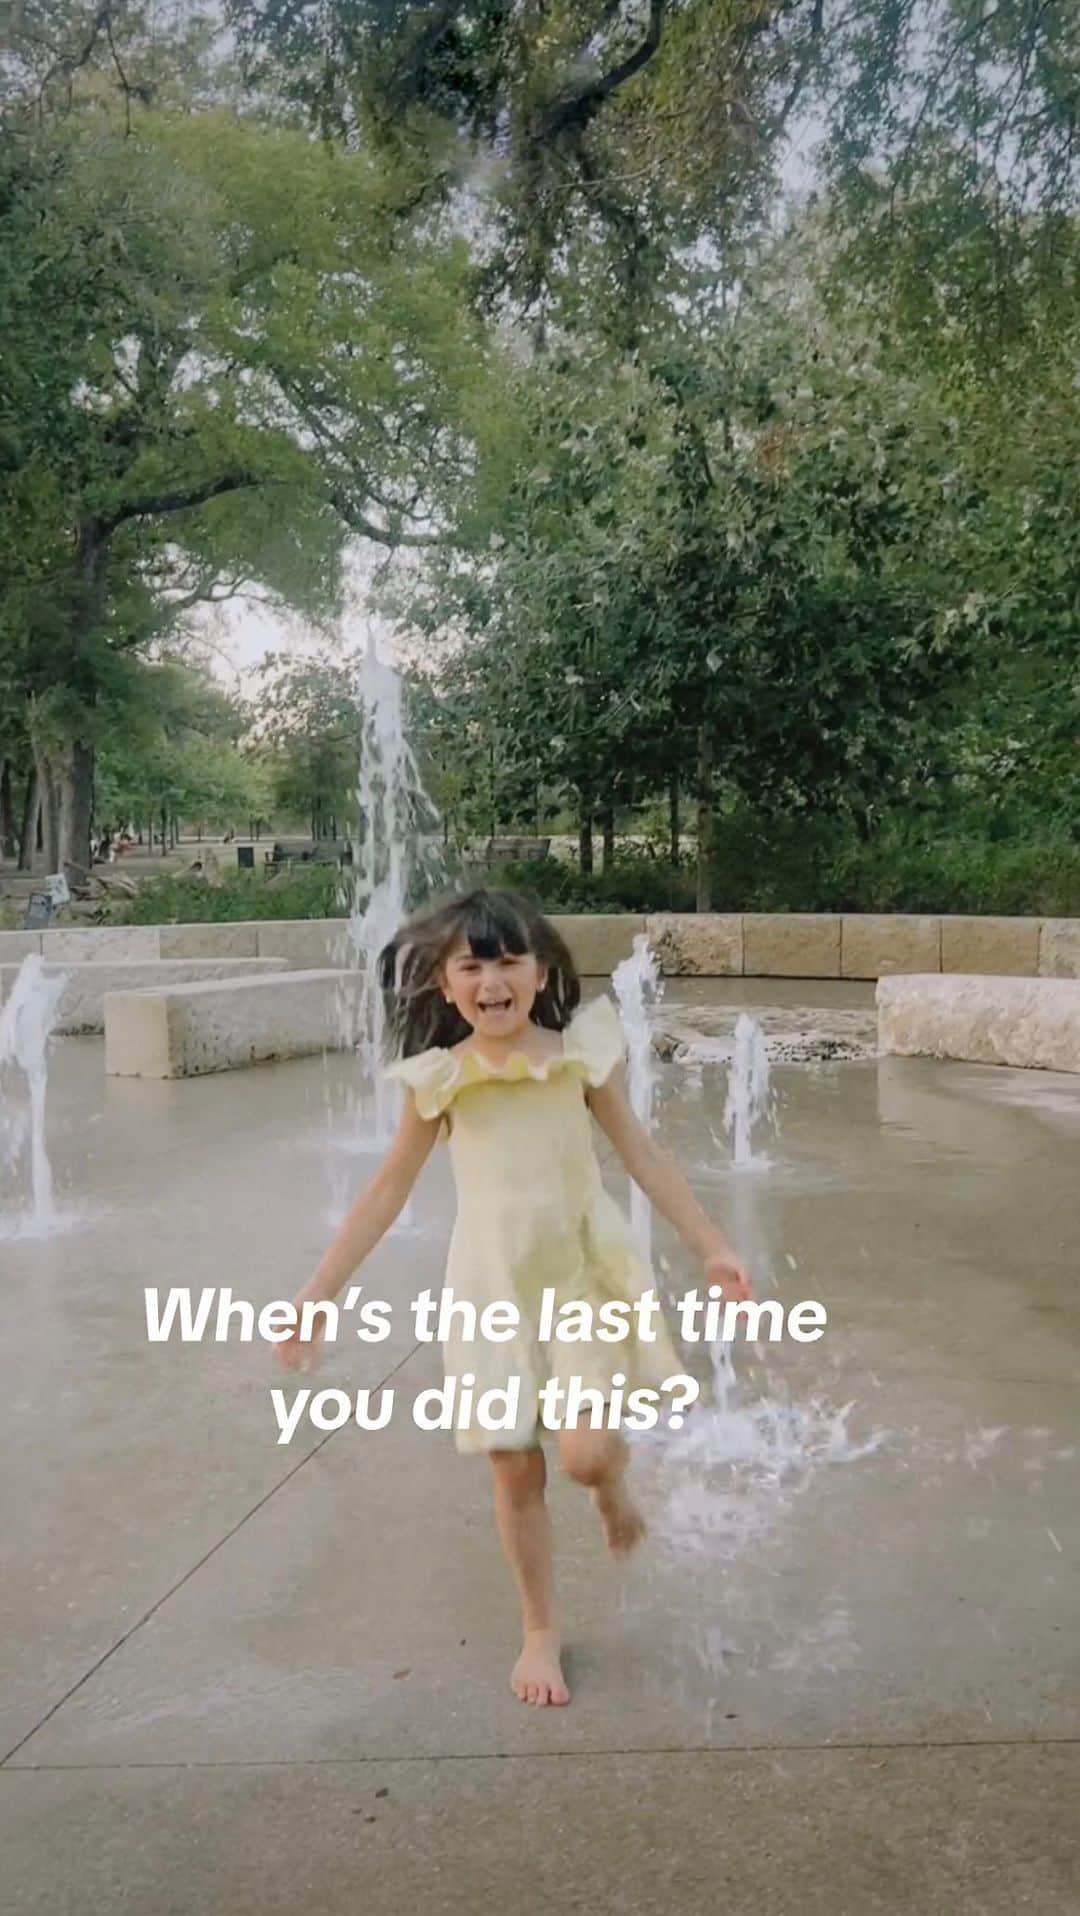 Sazan Hendrixのインスタグラム：「Watching my daughter run through that fountain, getting her dress wet and laughing with pure joy, I realized something profound. Life is meant to be like that sometimes – carefree, spontaneous and filled with childlike wonder. ✨🫶🏽 What’s funny is while I was writing a book about life, these sweet moments became the real awakenings, guiding me to rediscover the beauty in everyday life. 💫  When’s the last time you experienced a spontaneous moment that brought out your inner child or made you feel young at heart? Lmk what it was!! 💫💭😚🌟 #liveinthemoment #motherhoodjoys」